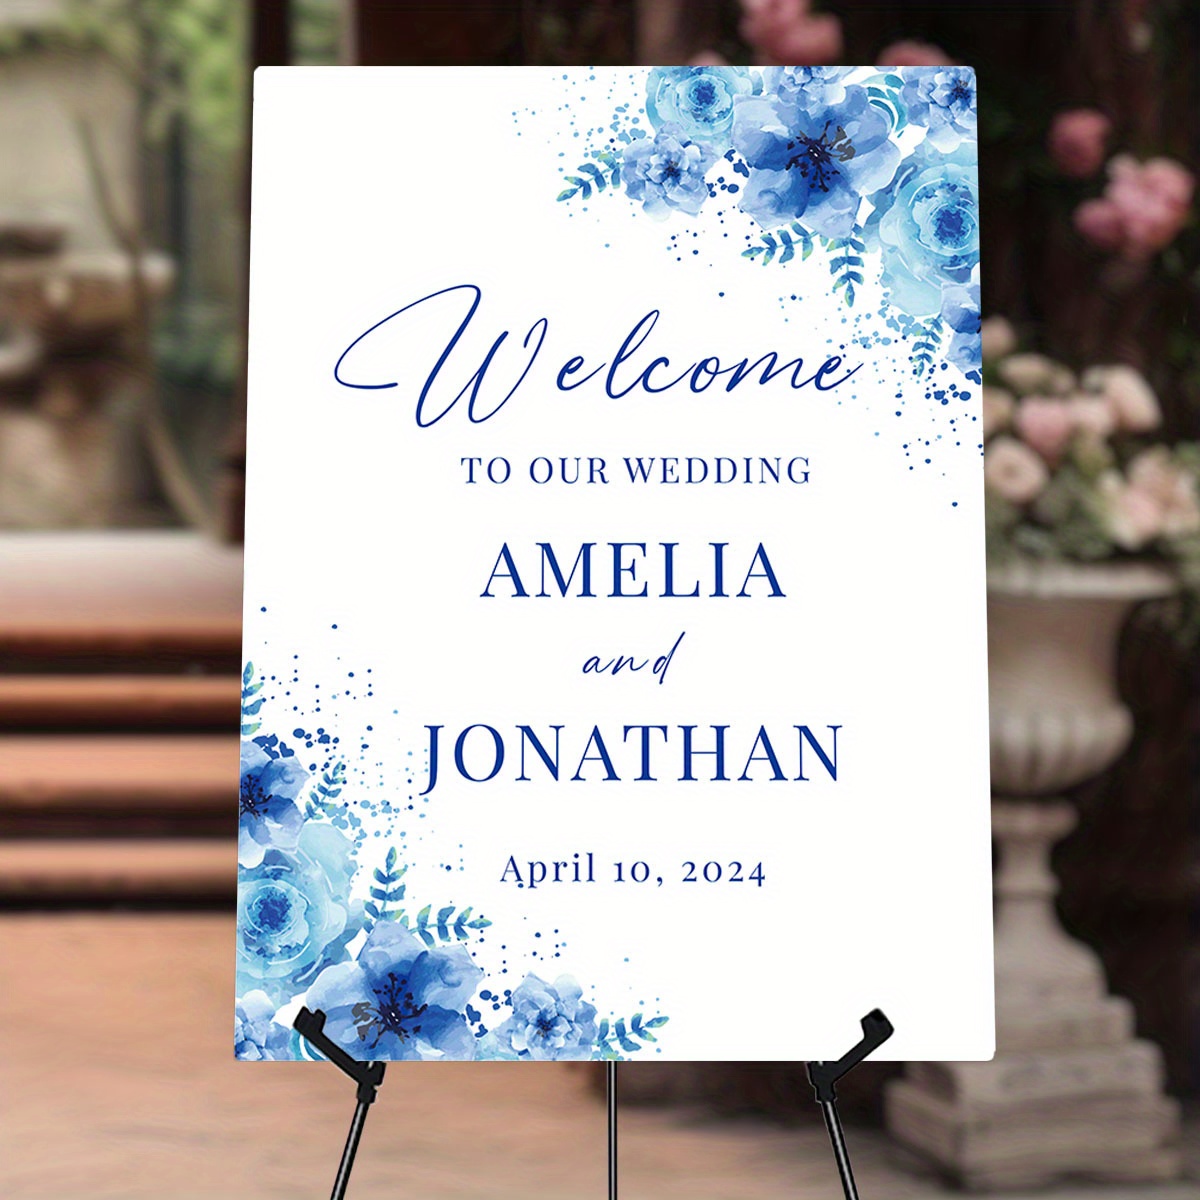 

1pc, Personalized Wedding Entrance Invitation Board, Welcome To Our Wedding Blue Floral Theme Wedding Custom Invitation Board, Wedding Personalization, Text Customization